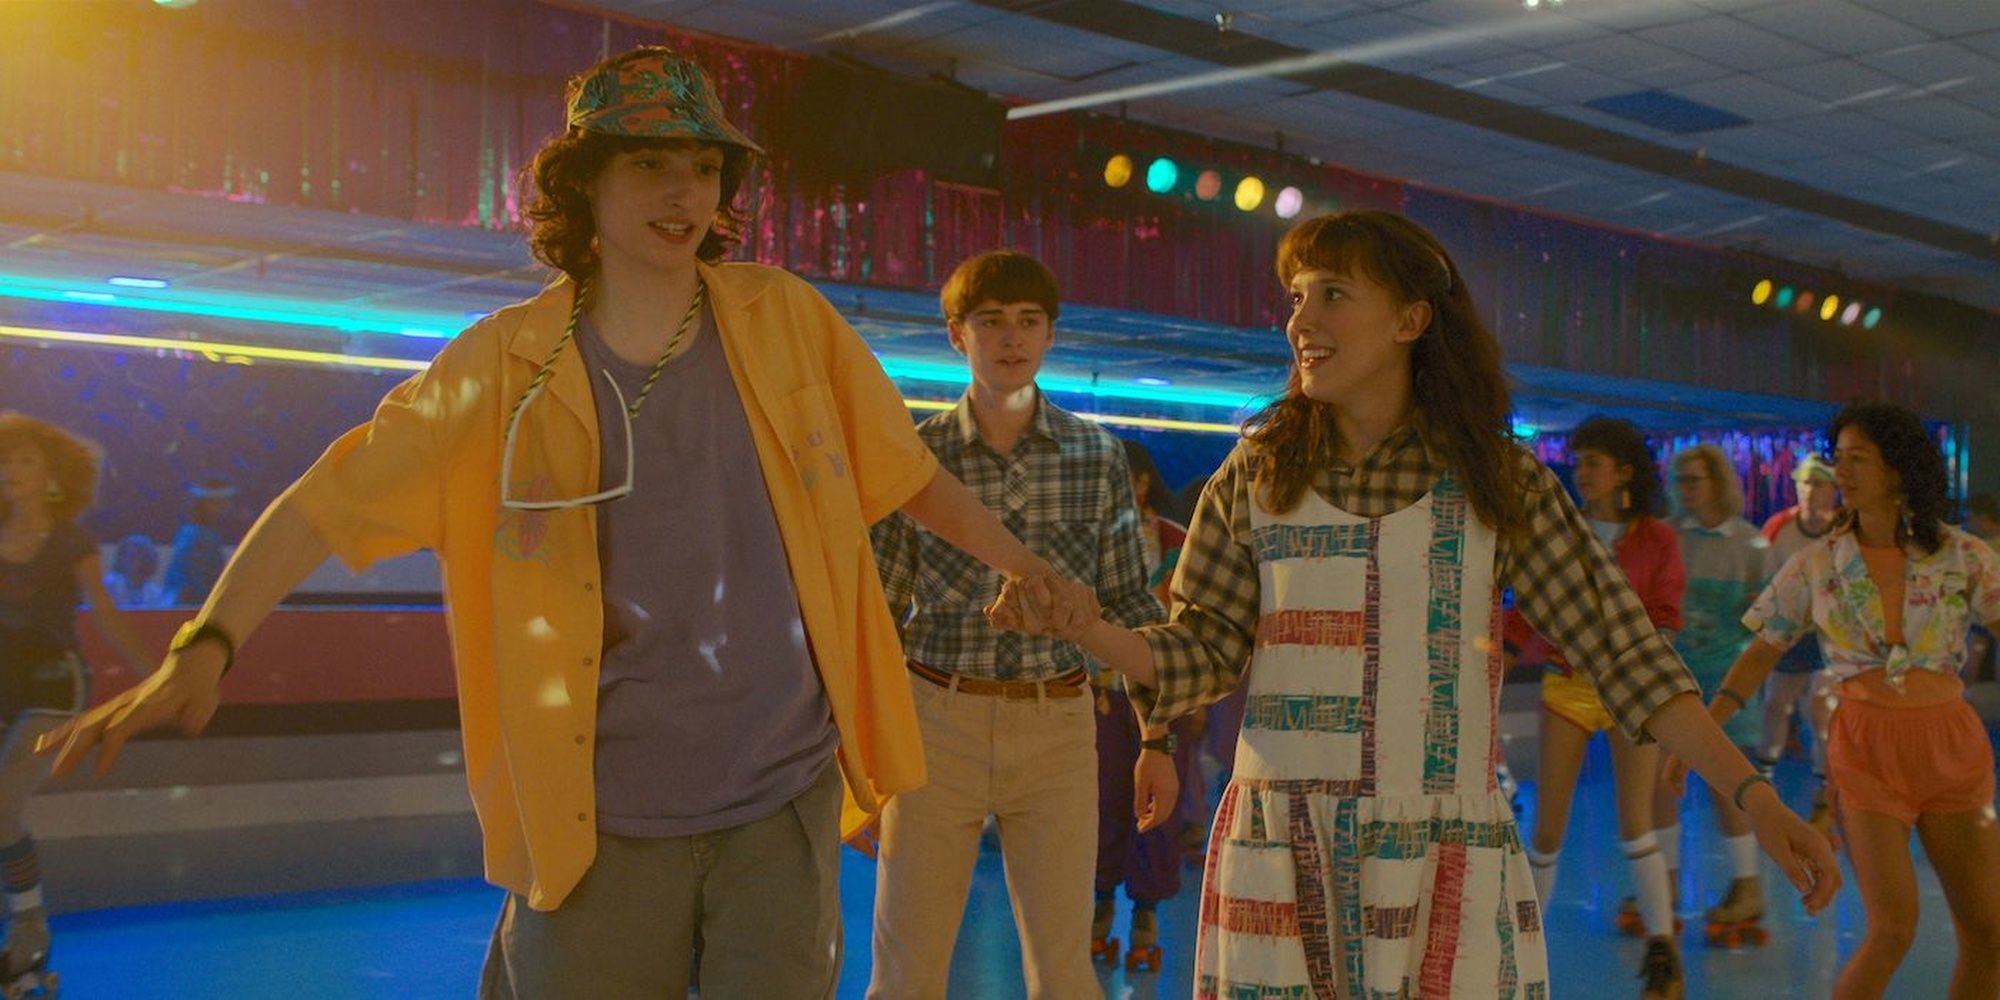 Mike, Eleven, and Will at a skating rink